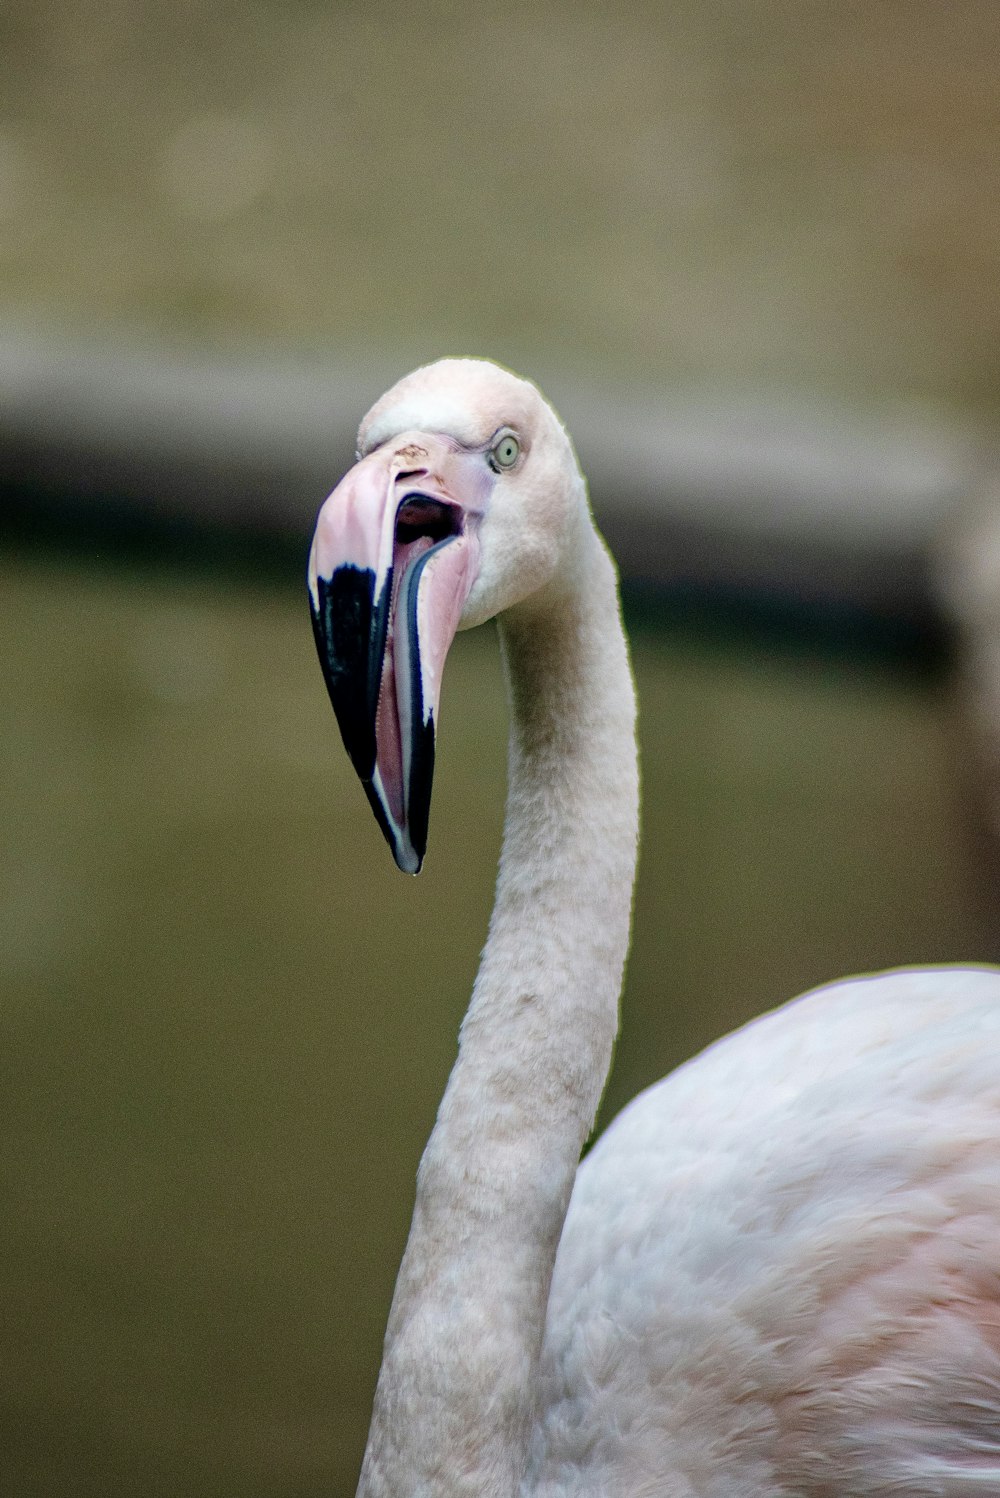 a close up of a flamingo with its mouth open